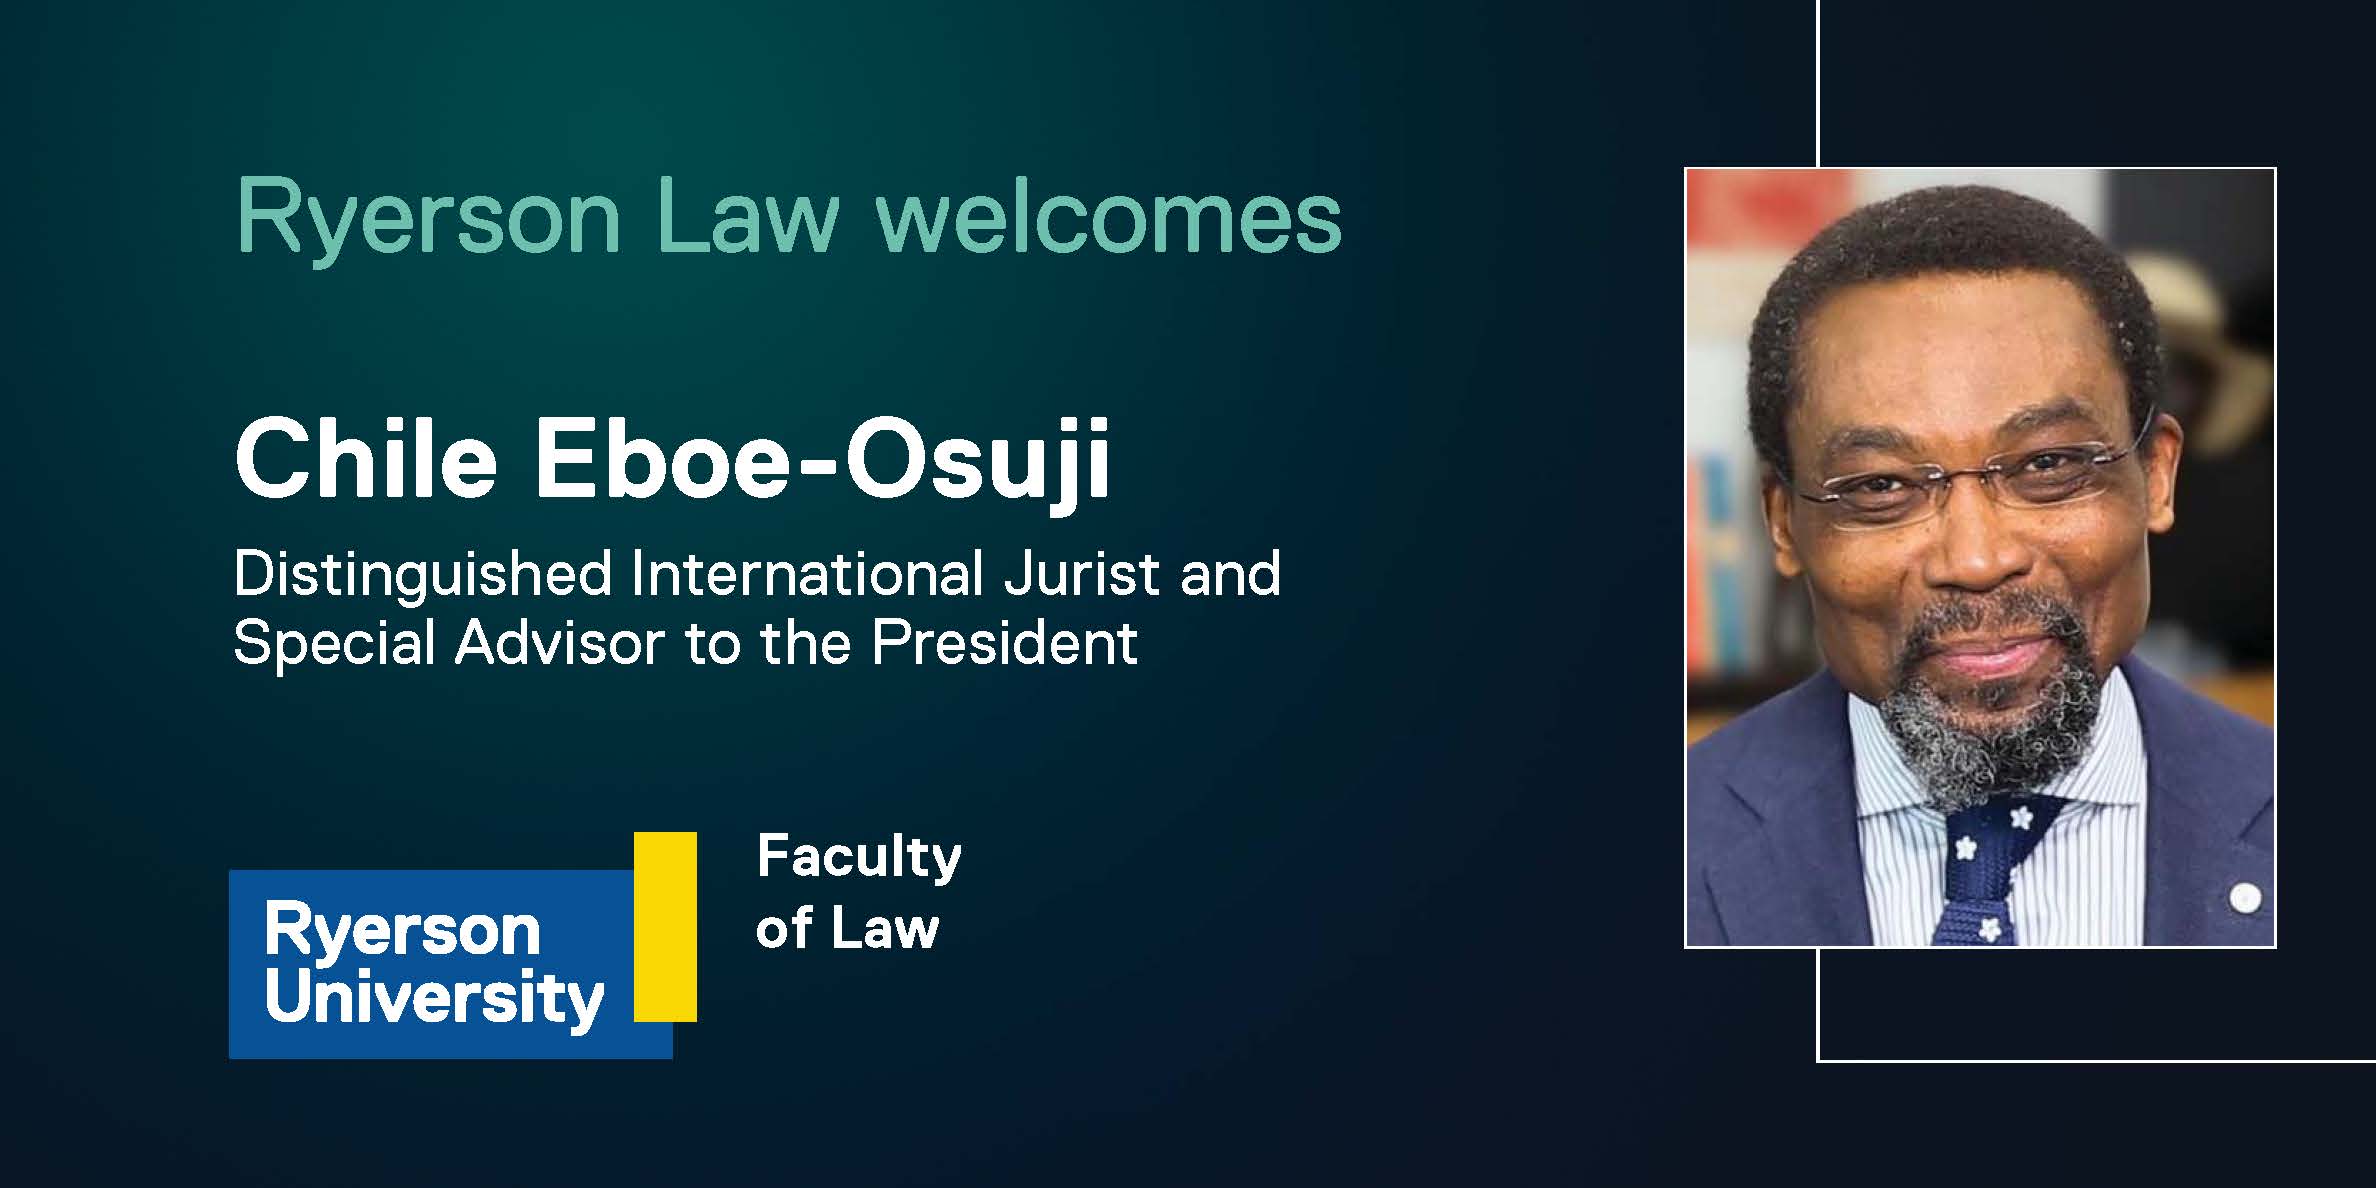 Ryerson Law Welcomes Dr. Chile Eboe-Osuji